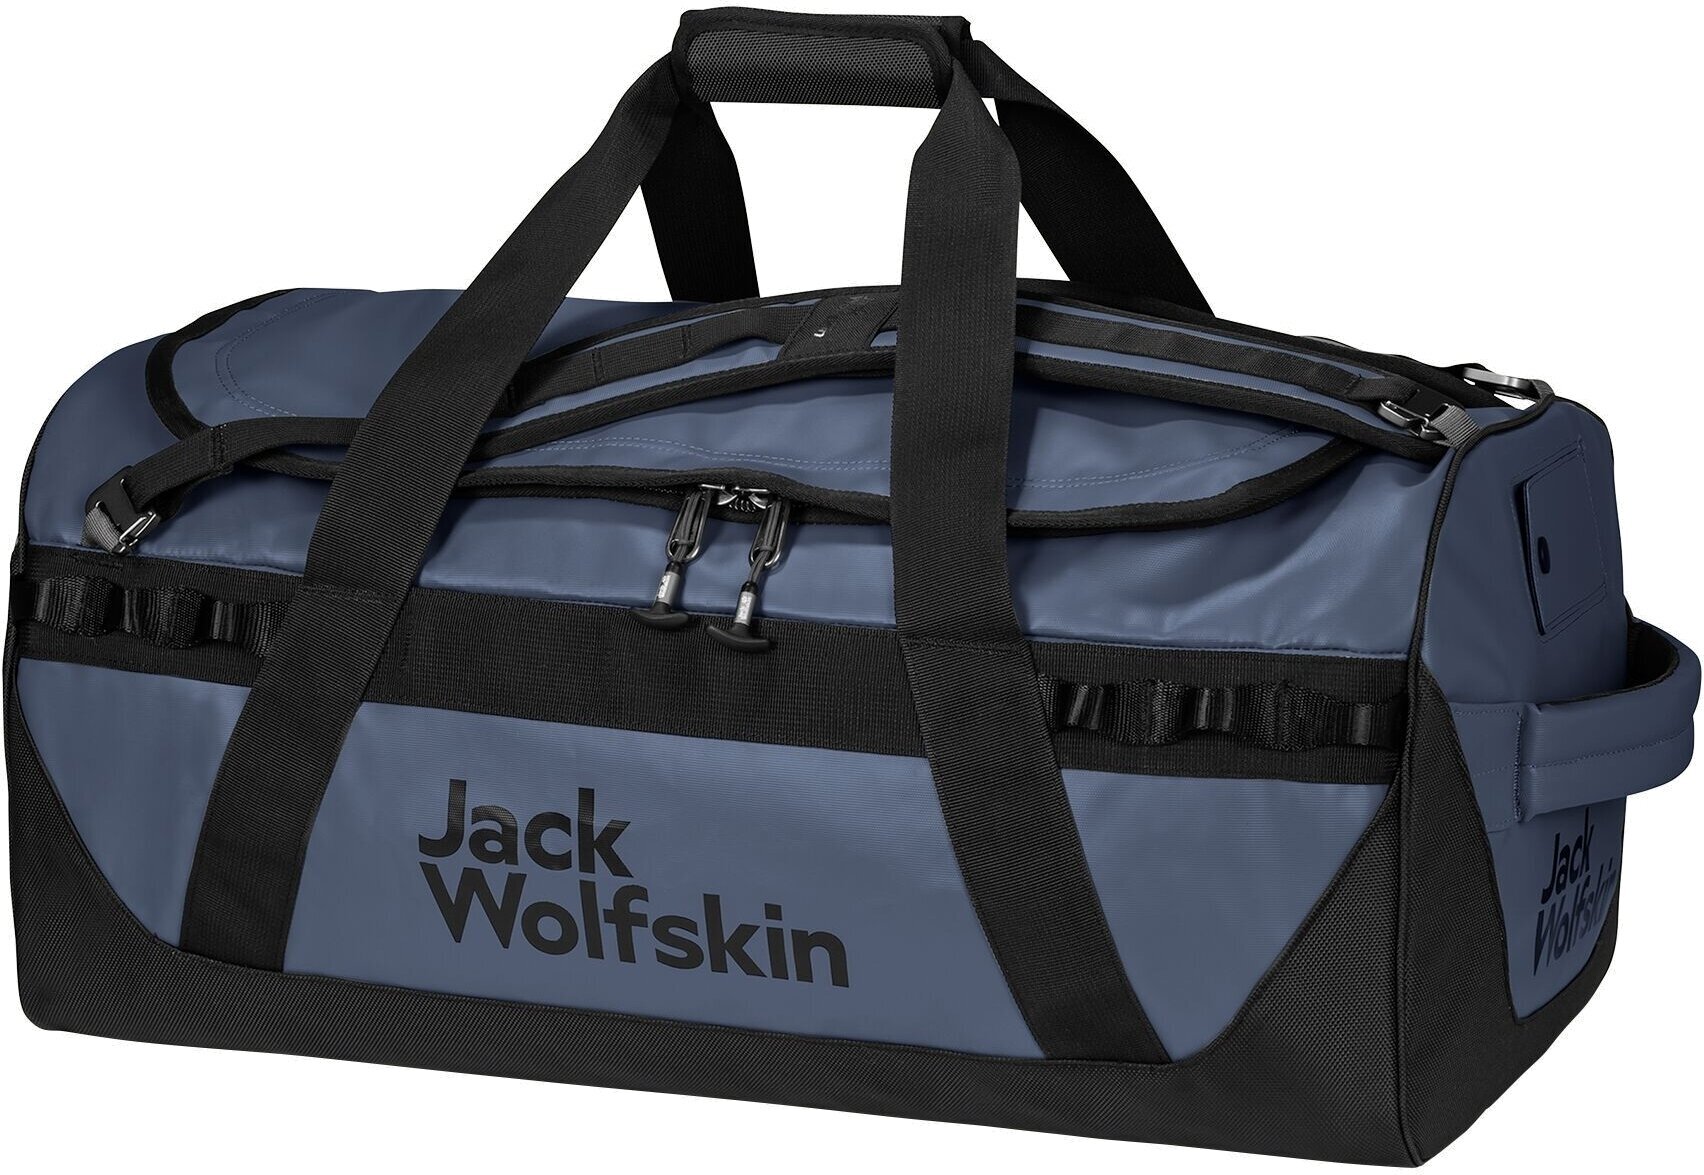 Outdoor Backpack Jack Wolfskin Expedition Trunk 65 Evening Sky One Size Outdoor Backpack